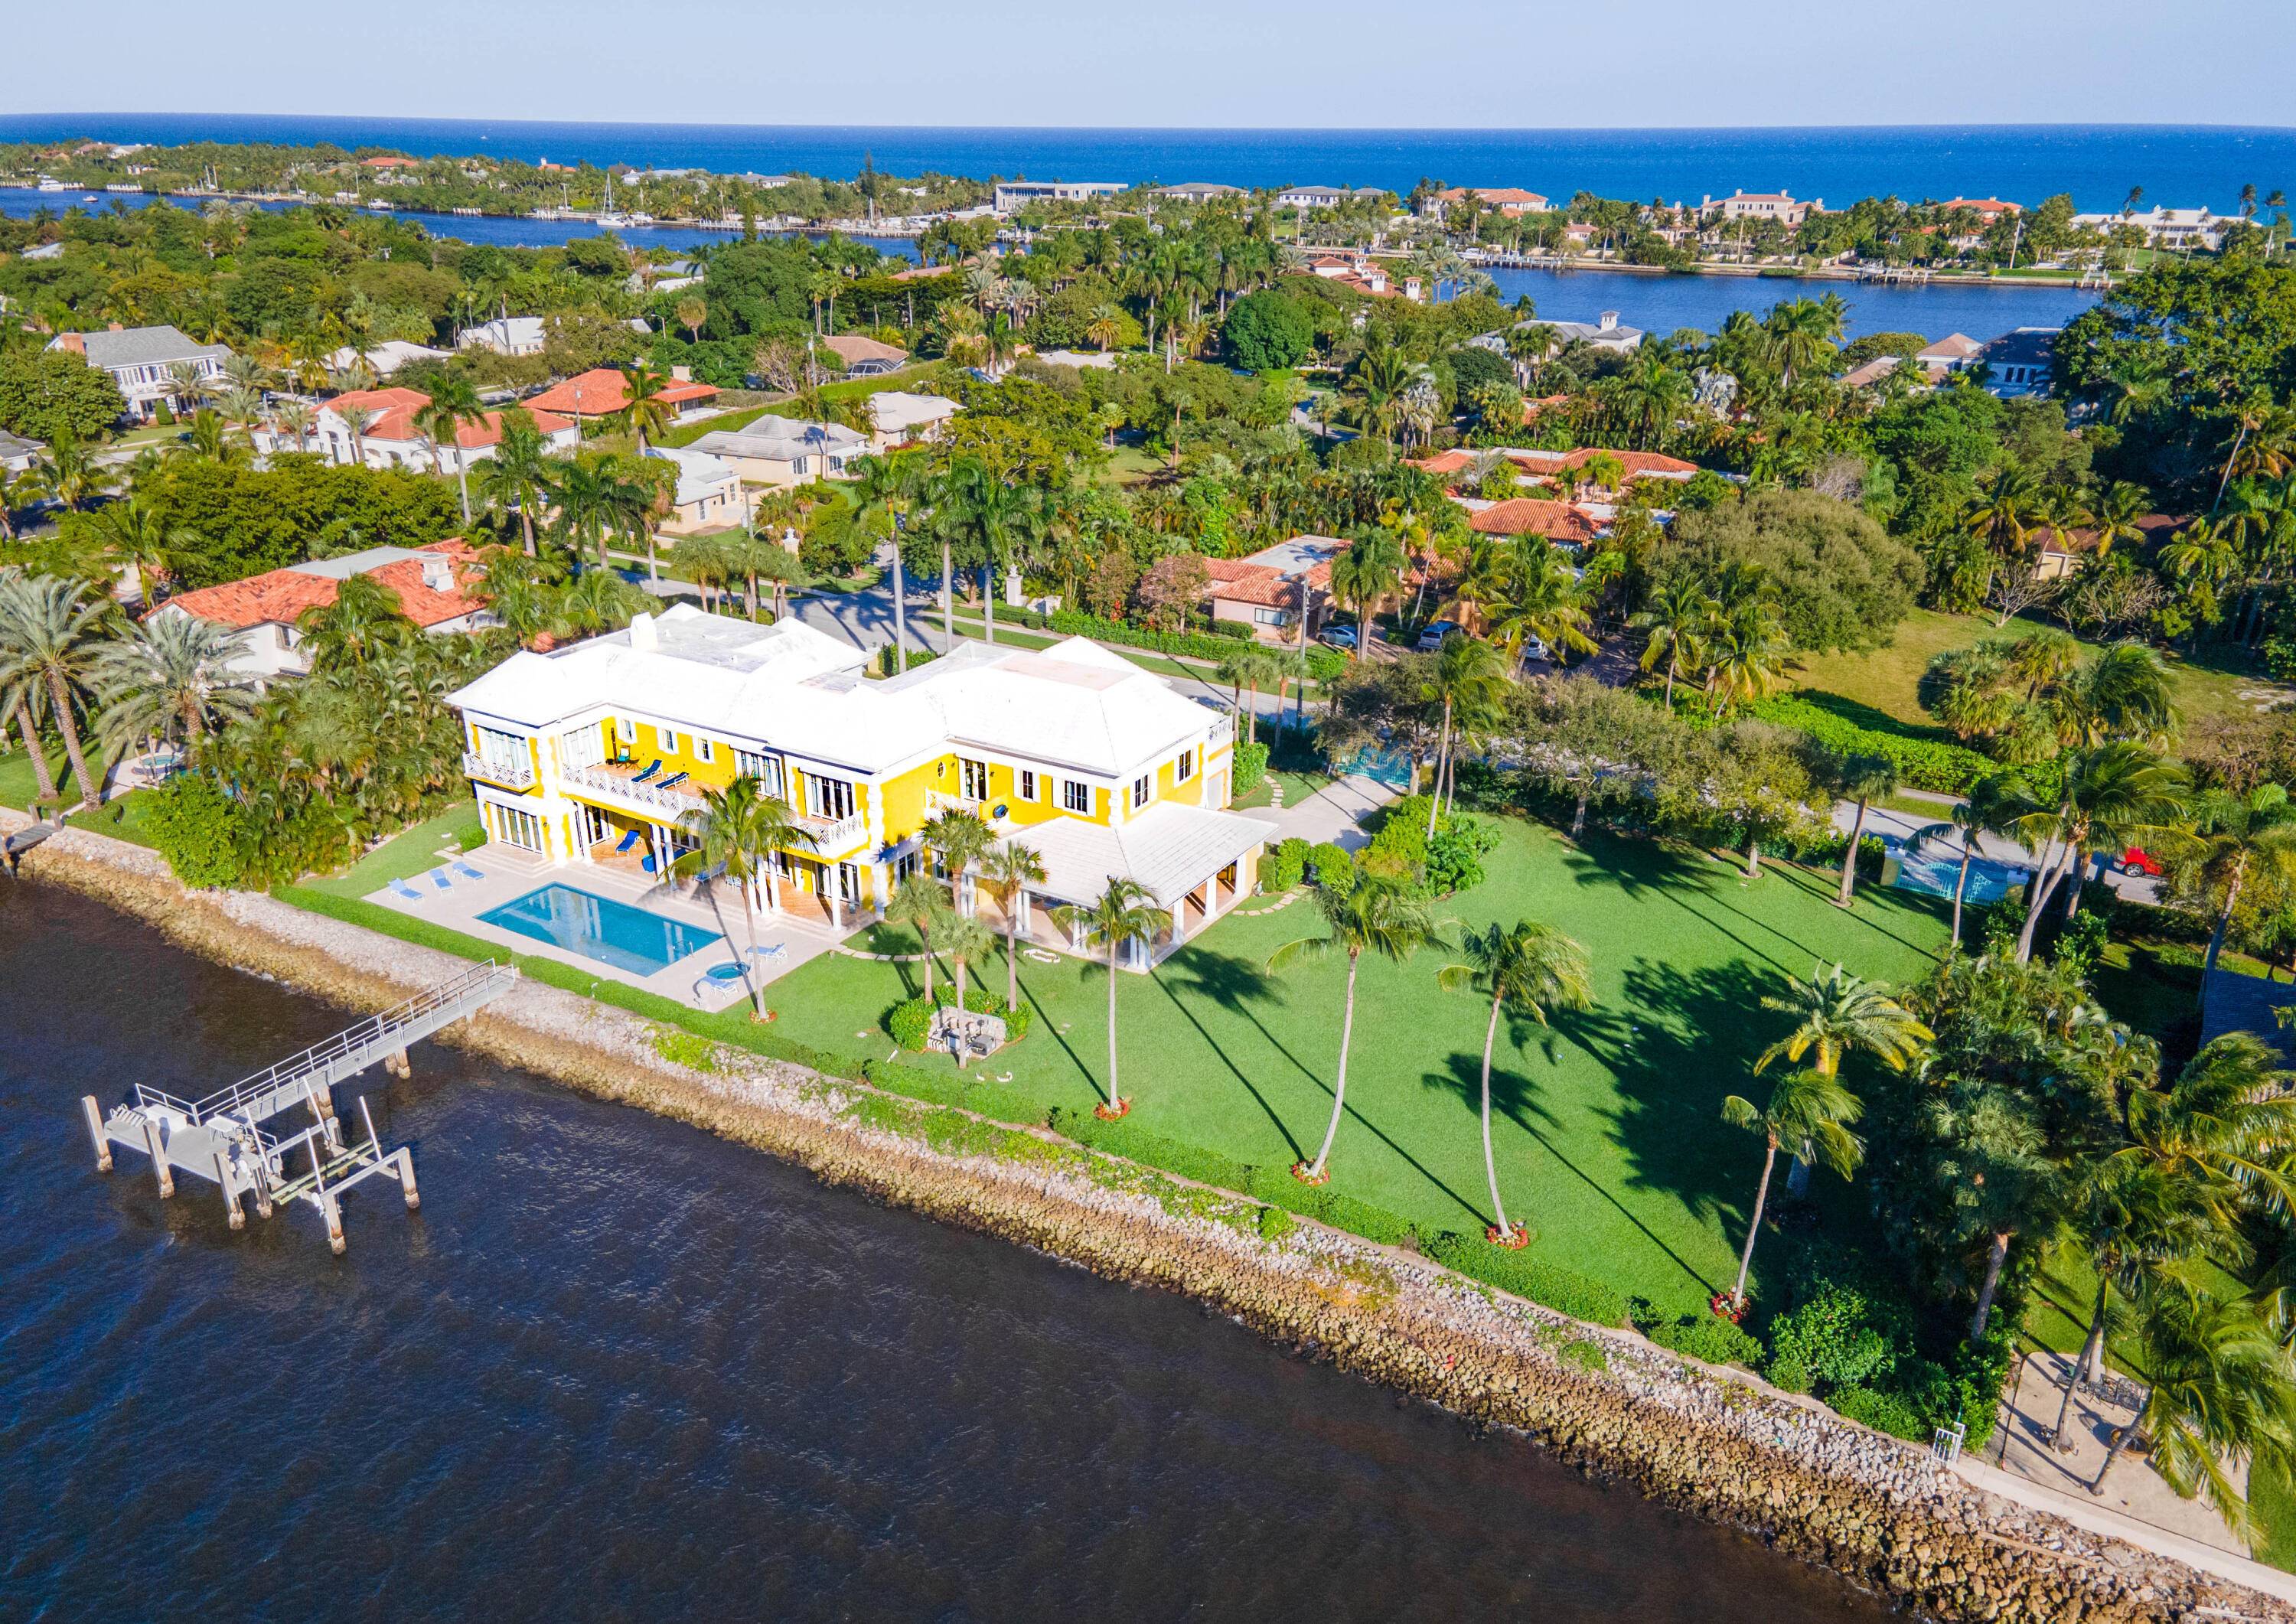 Grand Waterfront Estate with nearly 300 feet on the wide intracoastal and a short drive south of palm beach, this absolutely stunning gated estate boasts 12.